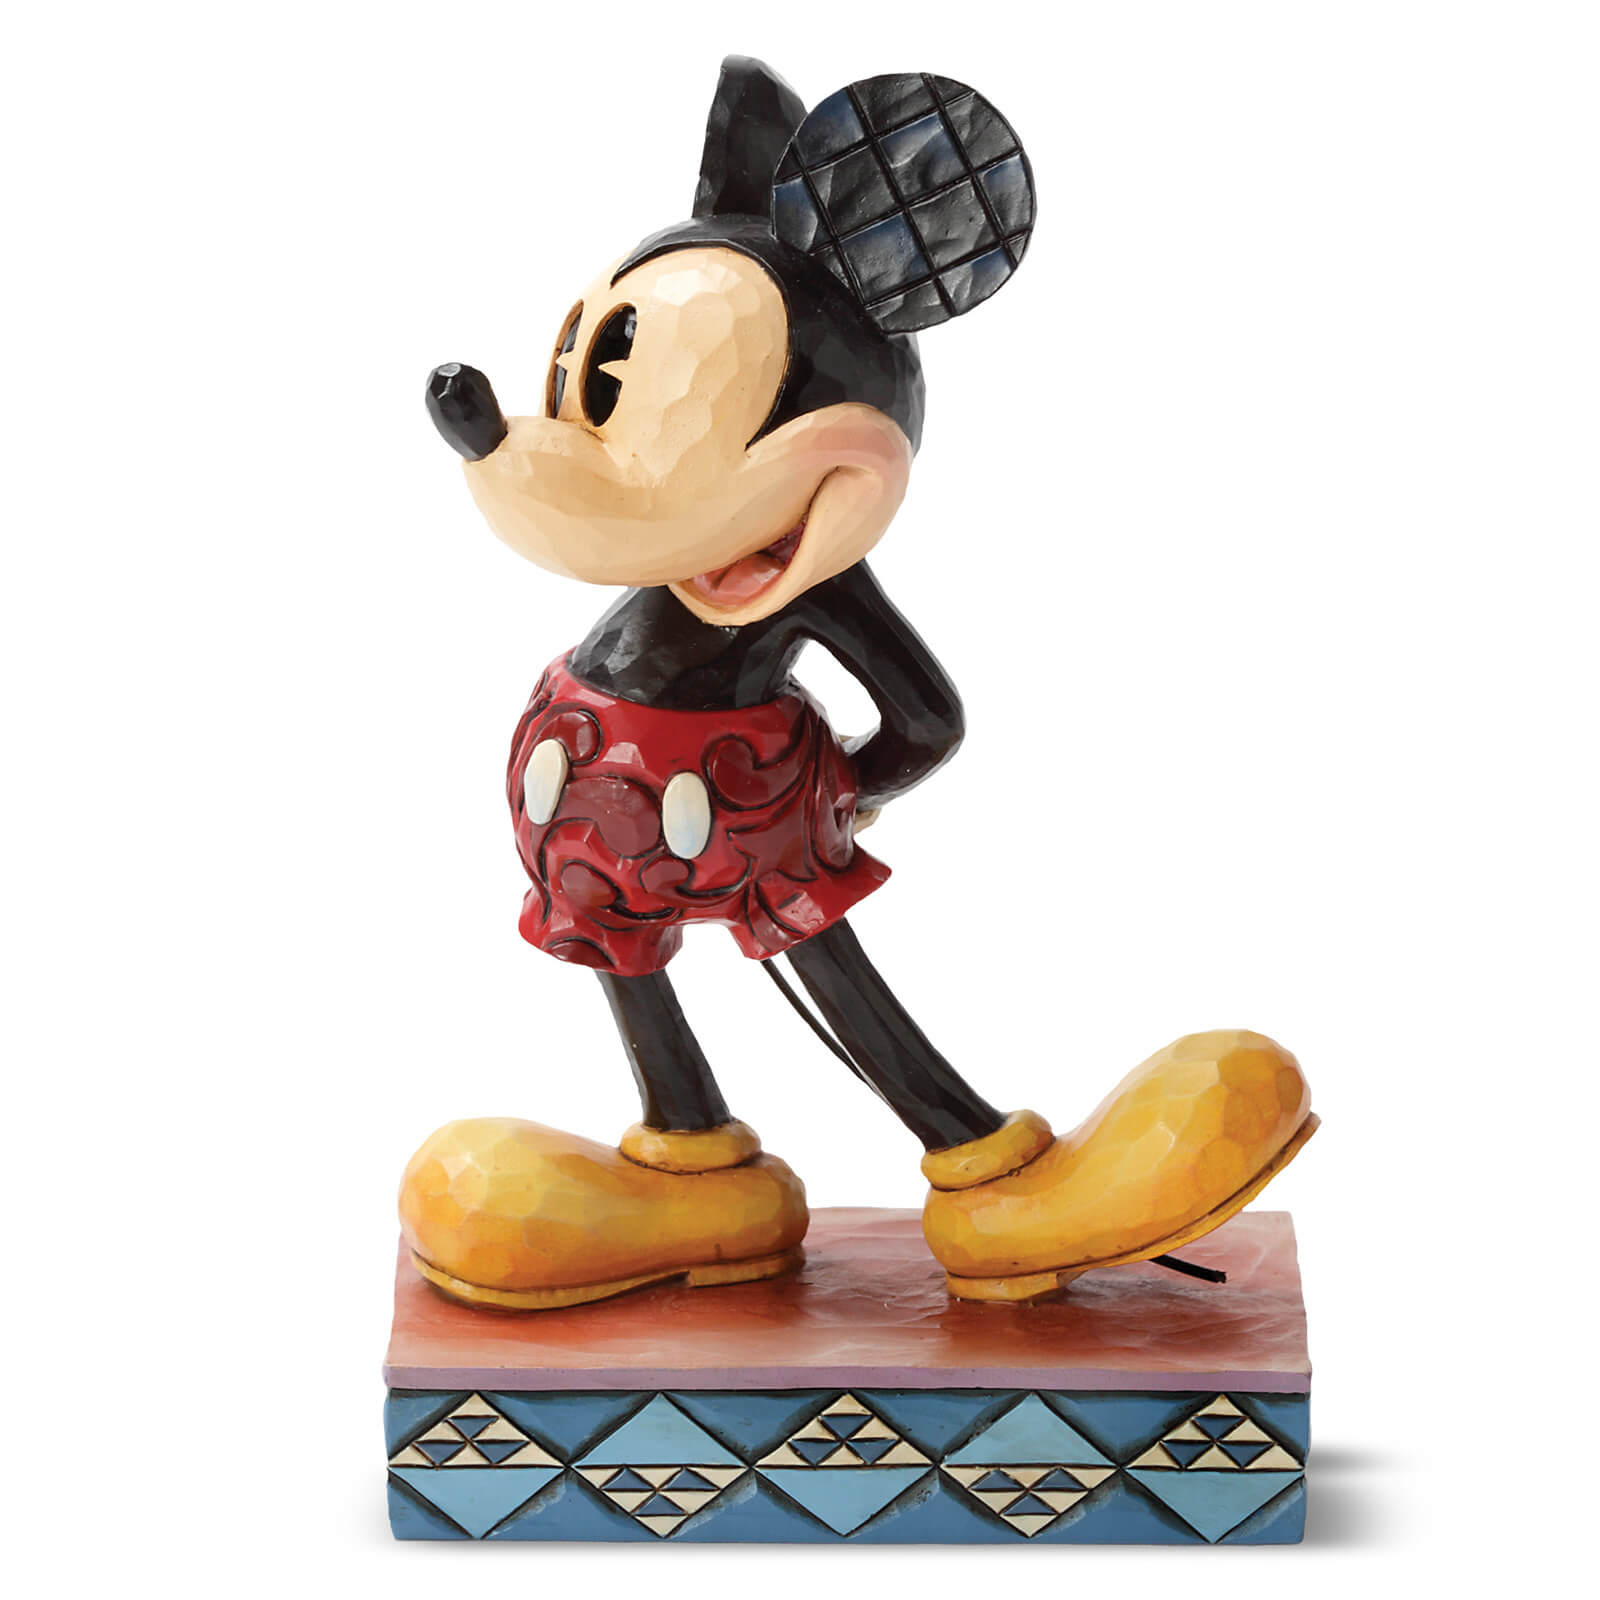 Disney Traditions The Original Mickey Mouse Figurine